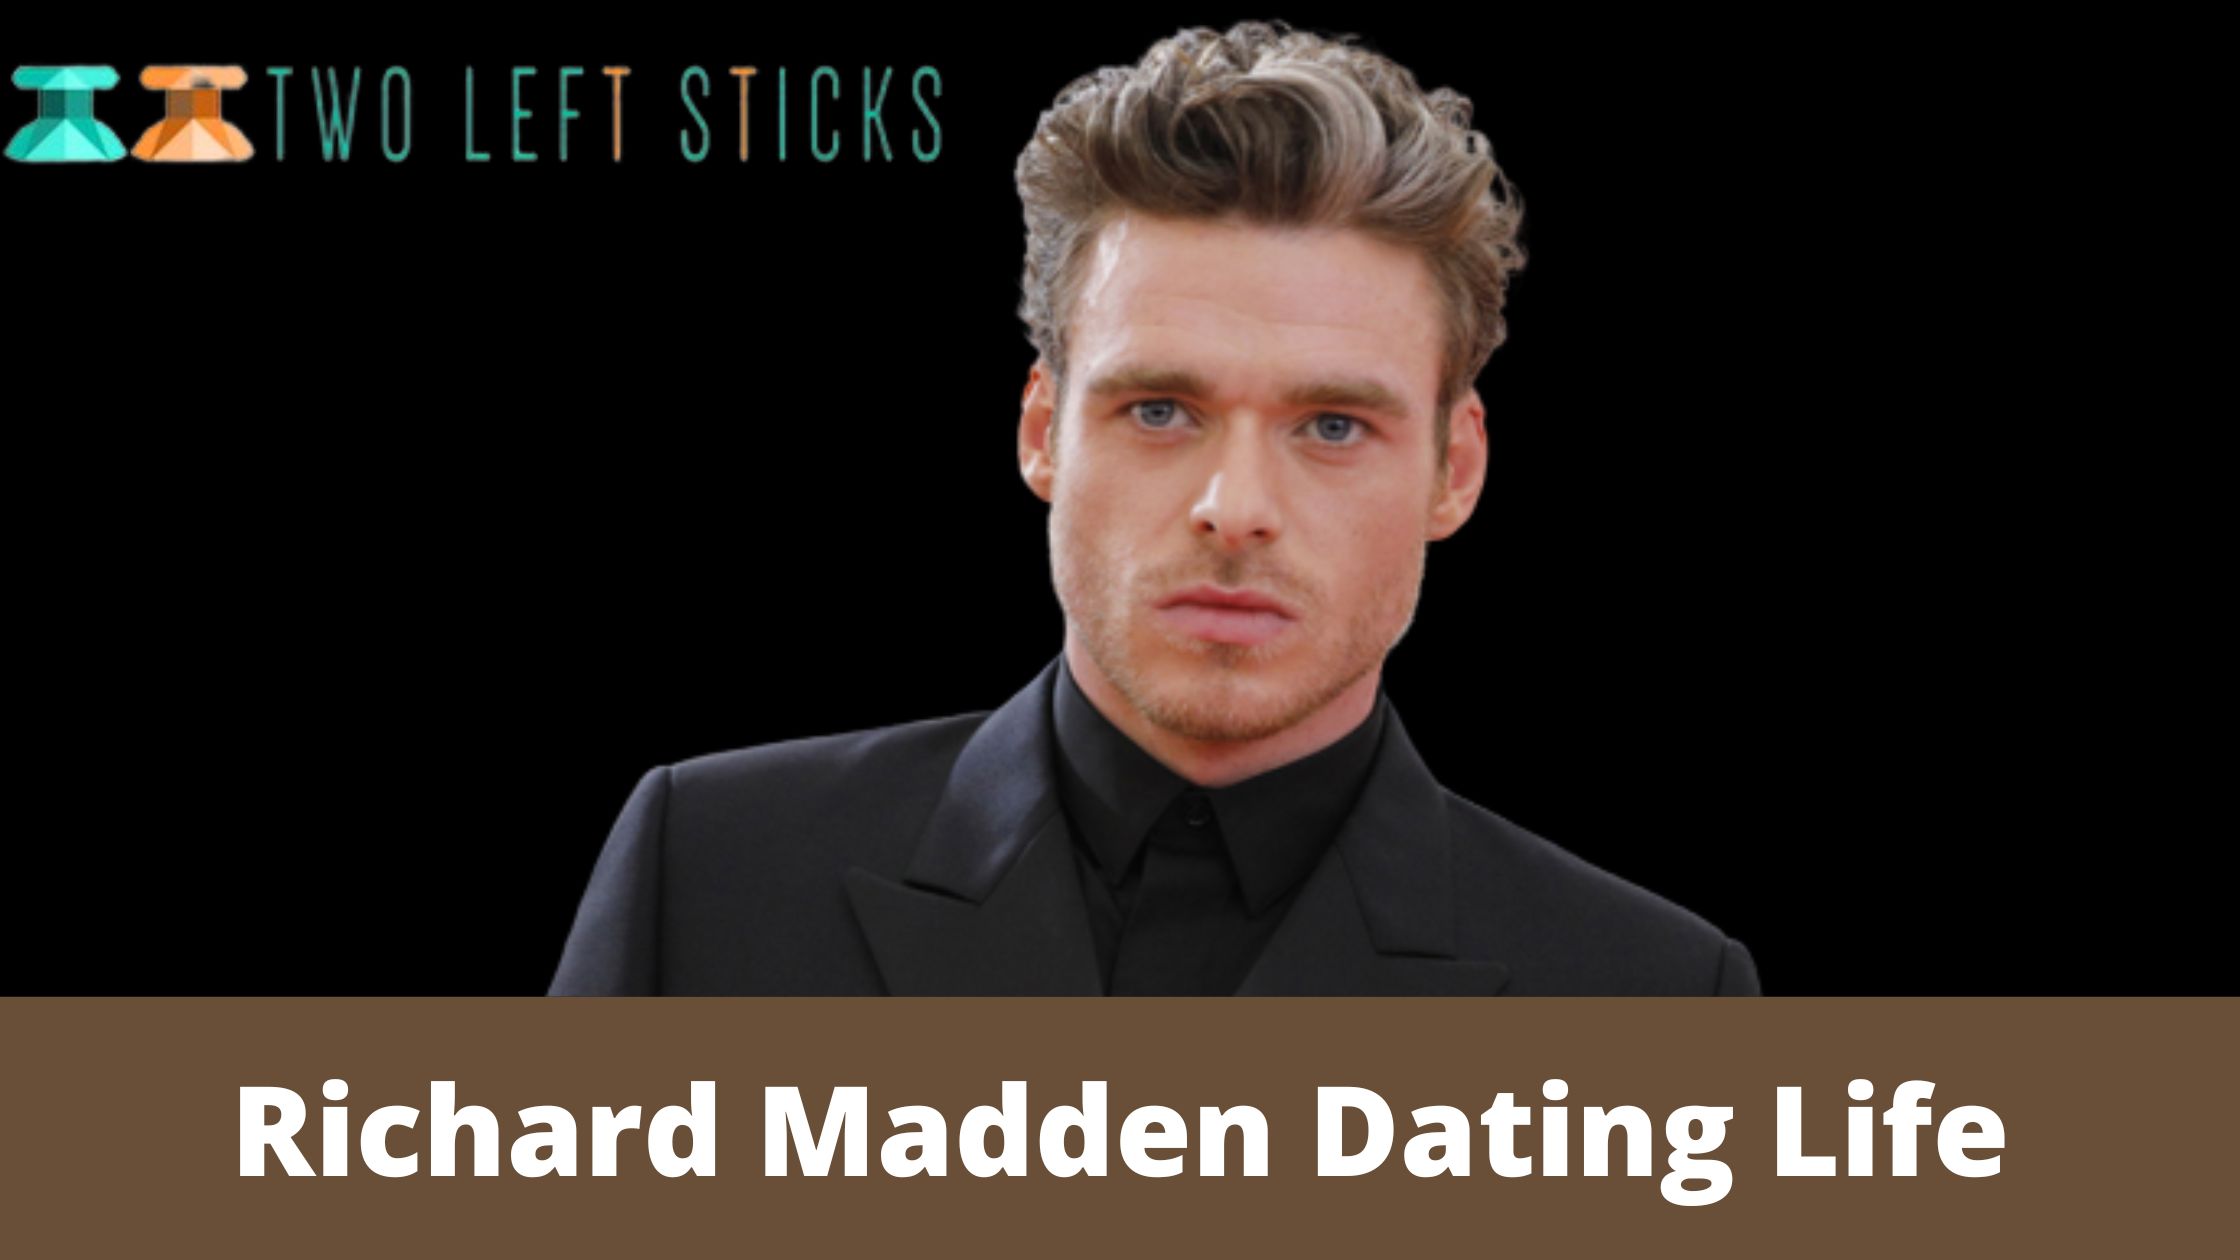 Richard Madden Dating Life- Does He Have a Spouse or Is He Single?